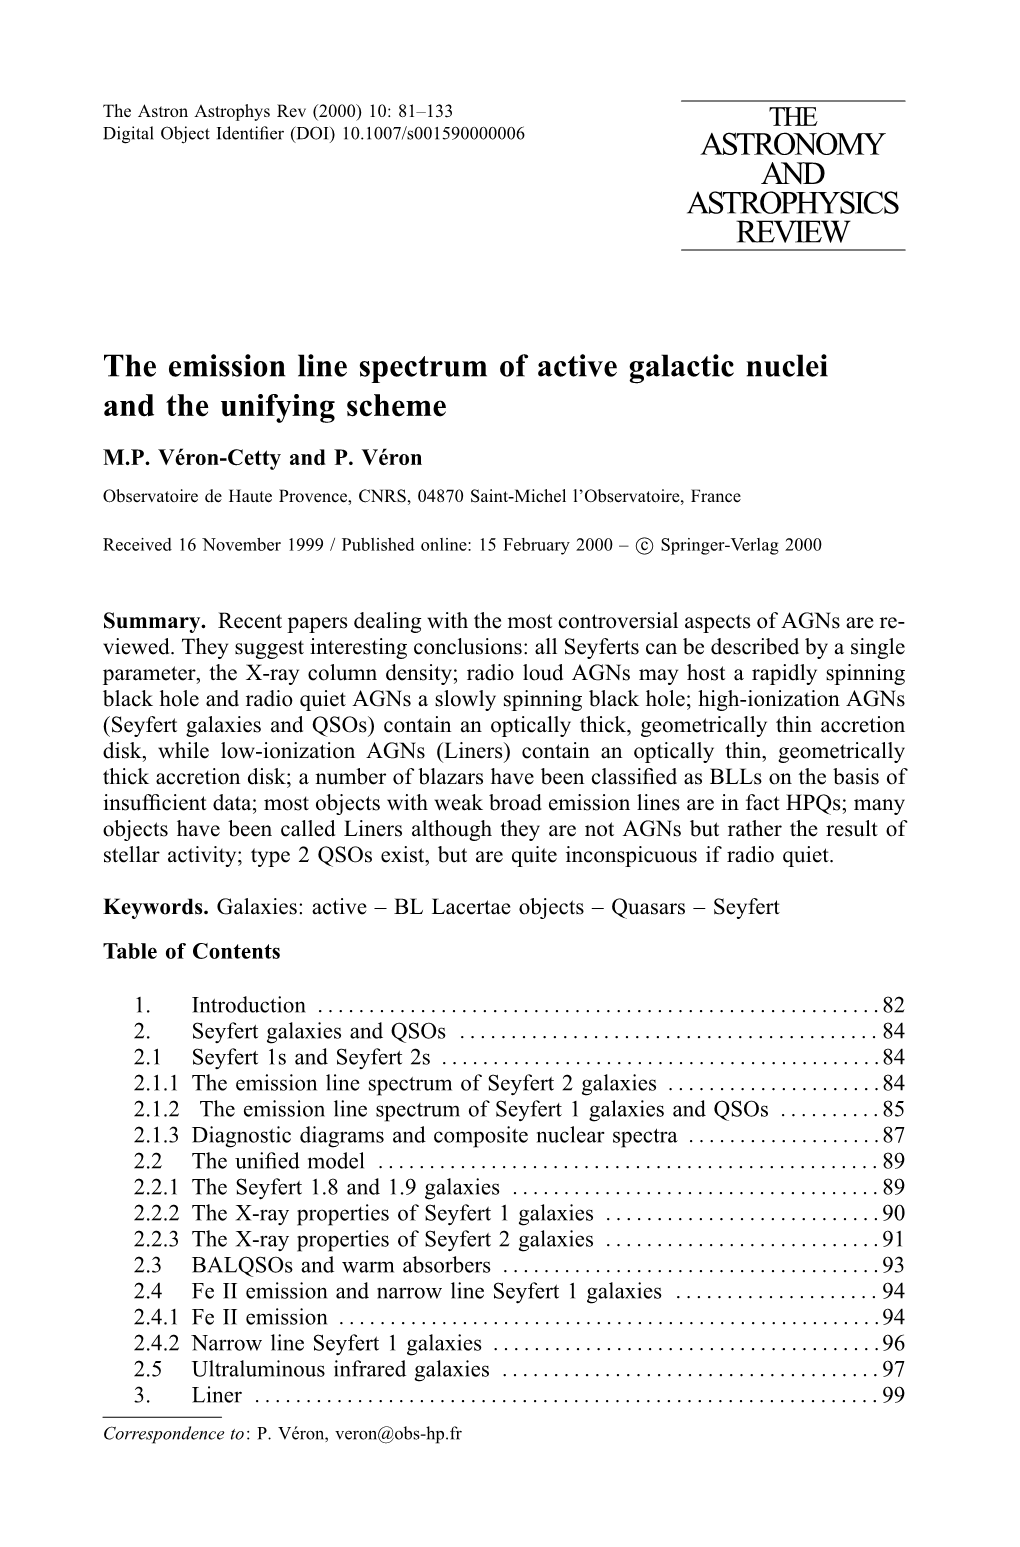 The Emission Line Spectrum of Active Galactic Nuclei and the Unifying Scheme